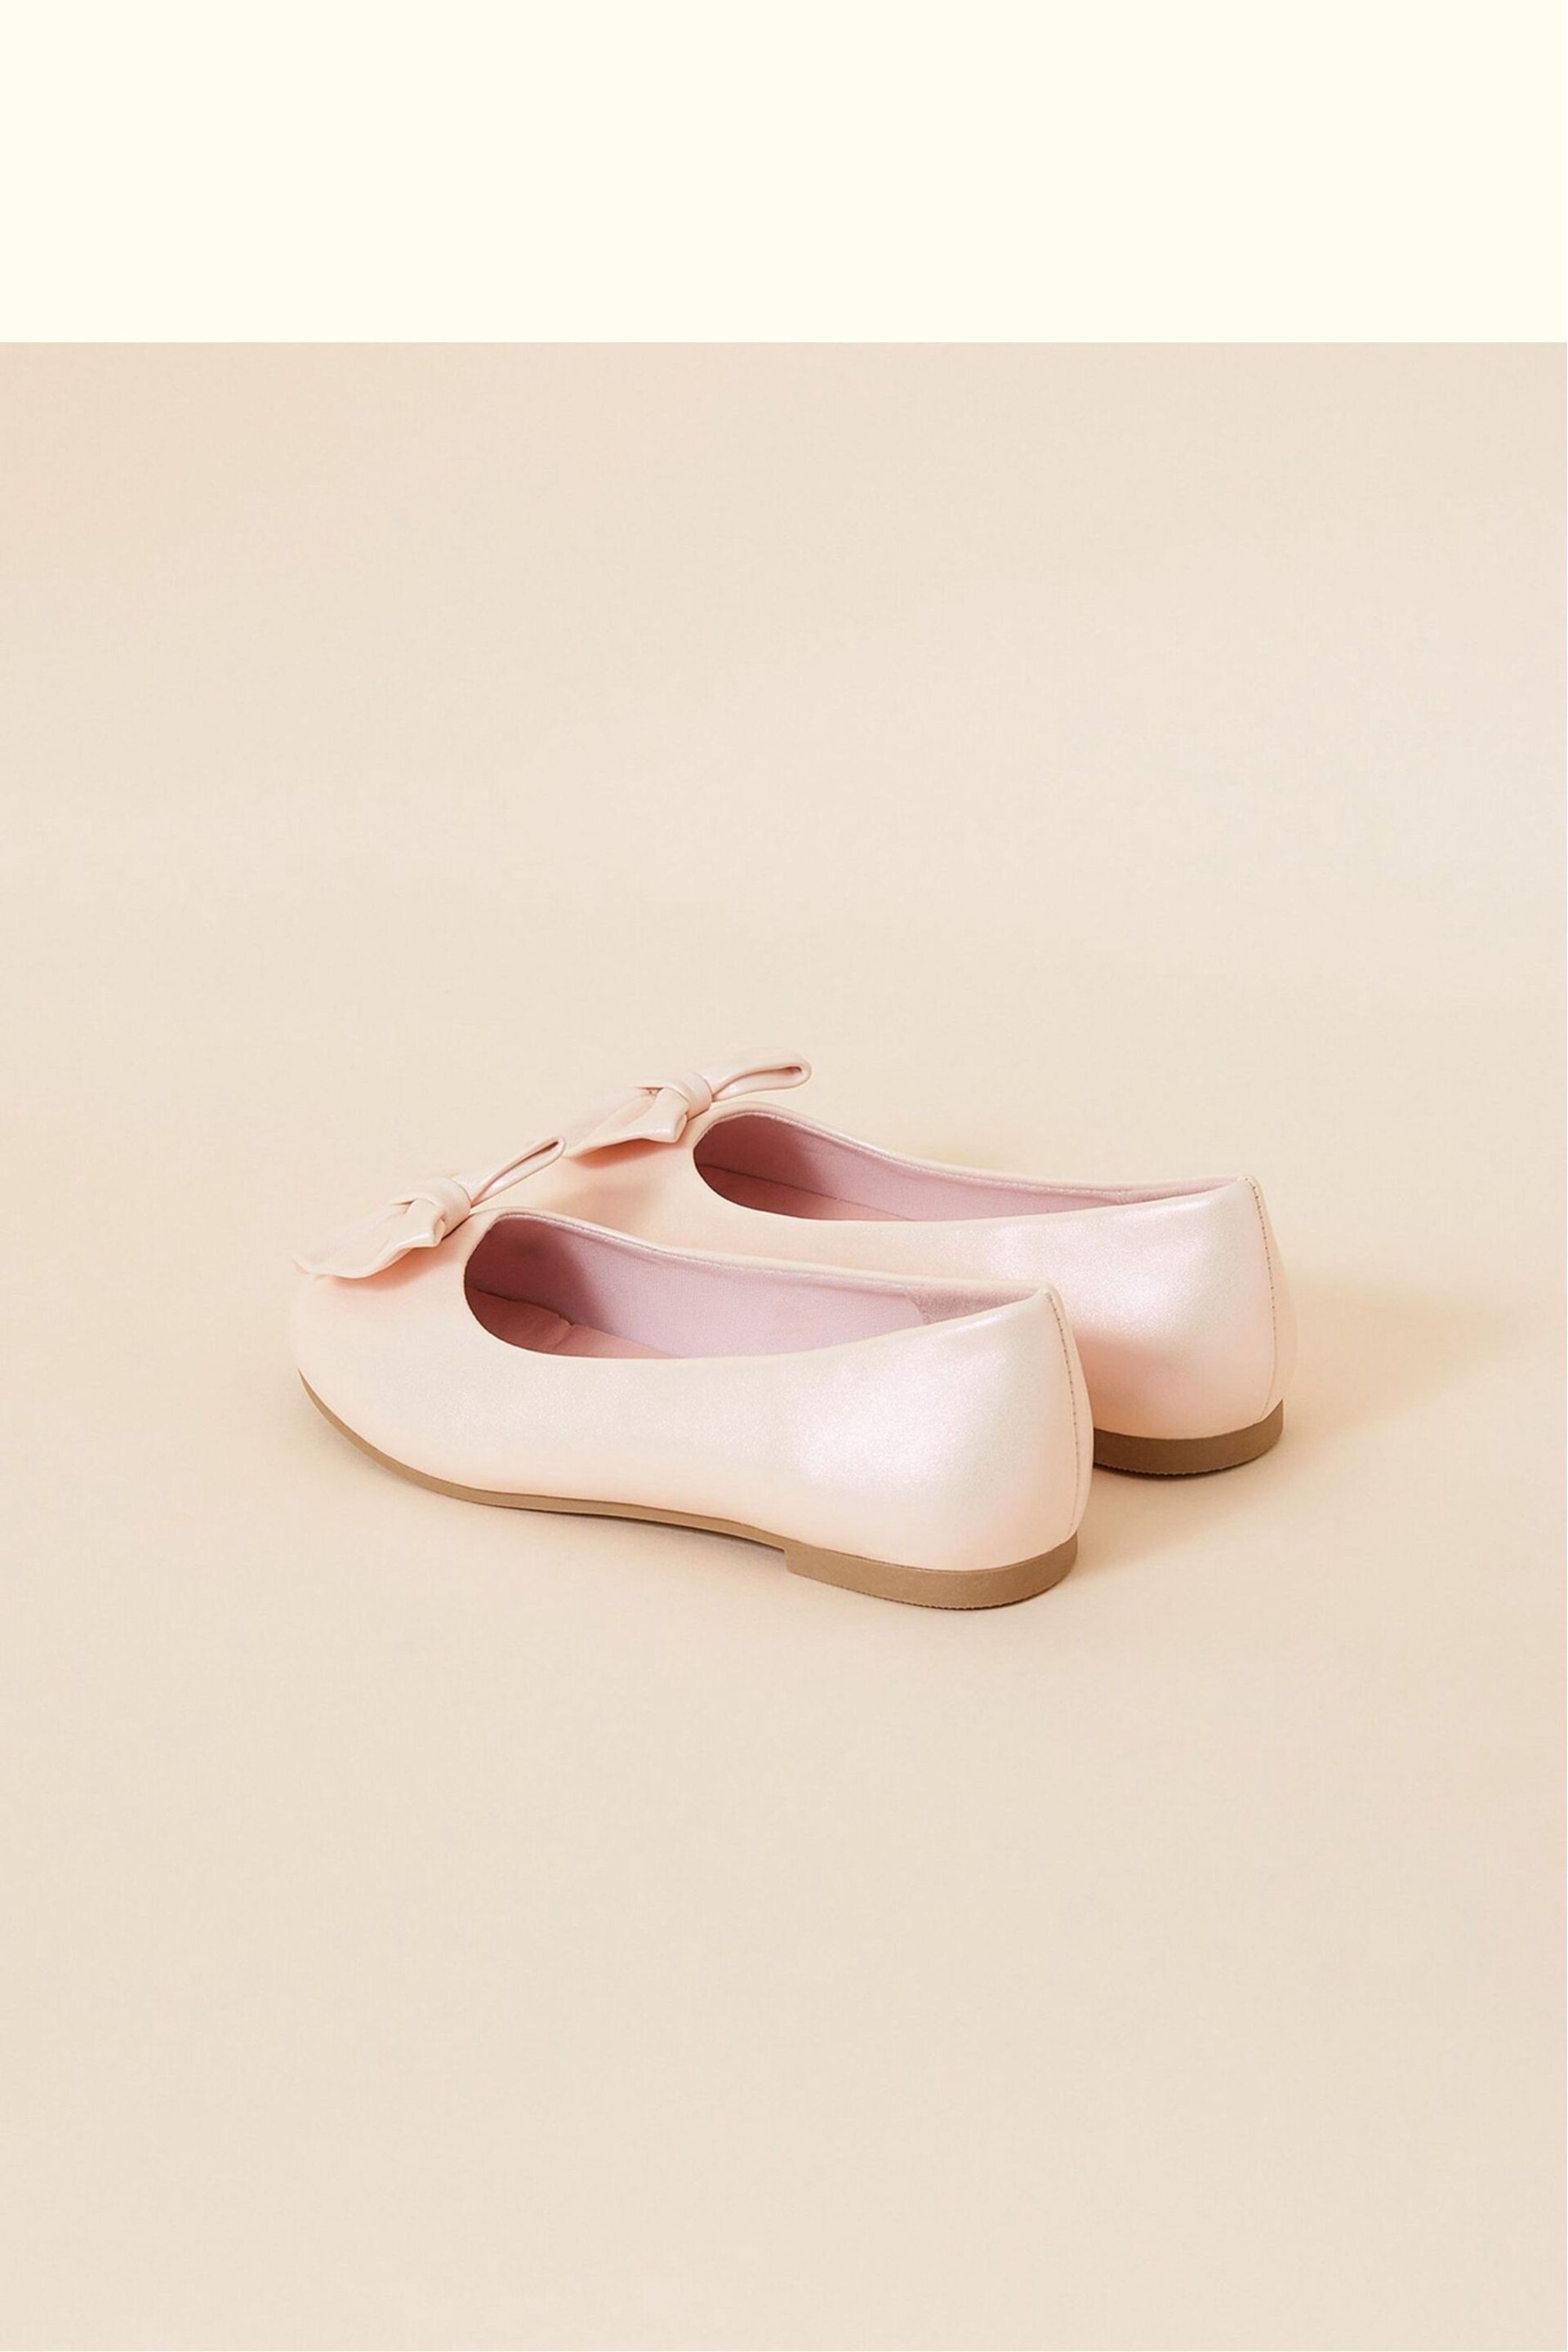 Angels by Accessorize Girls Pink Bow Ballerina Flat Shoes - Image 2 of 2